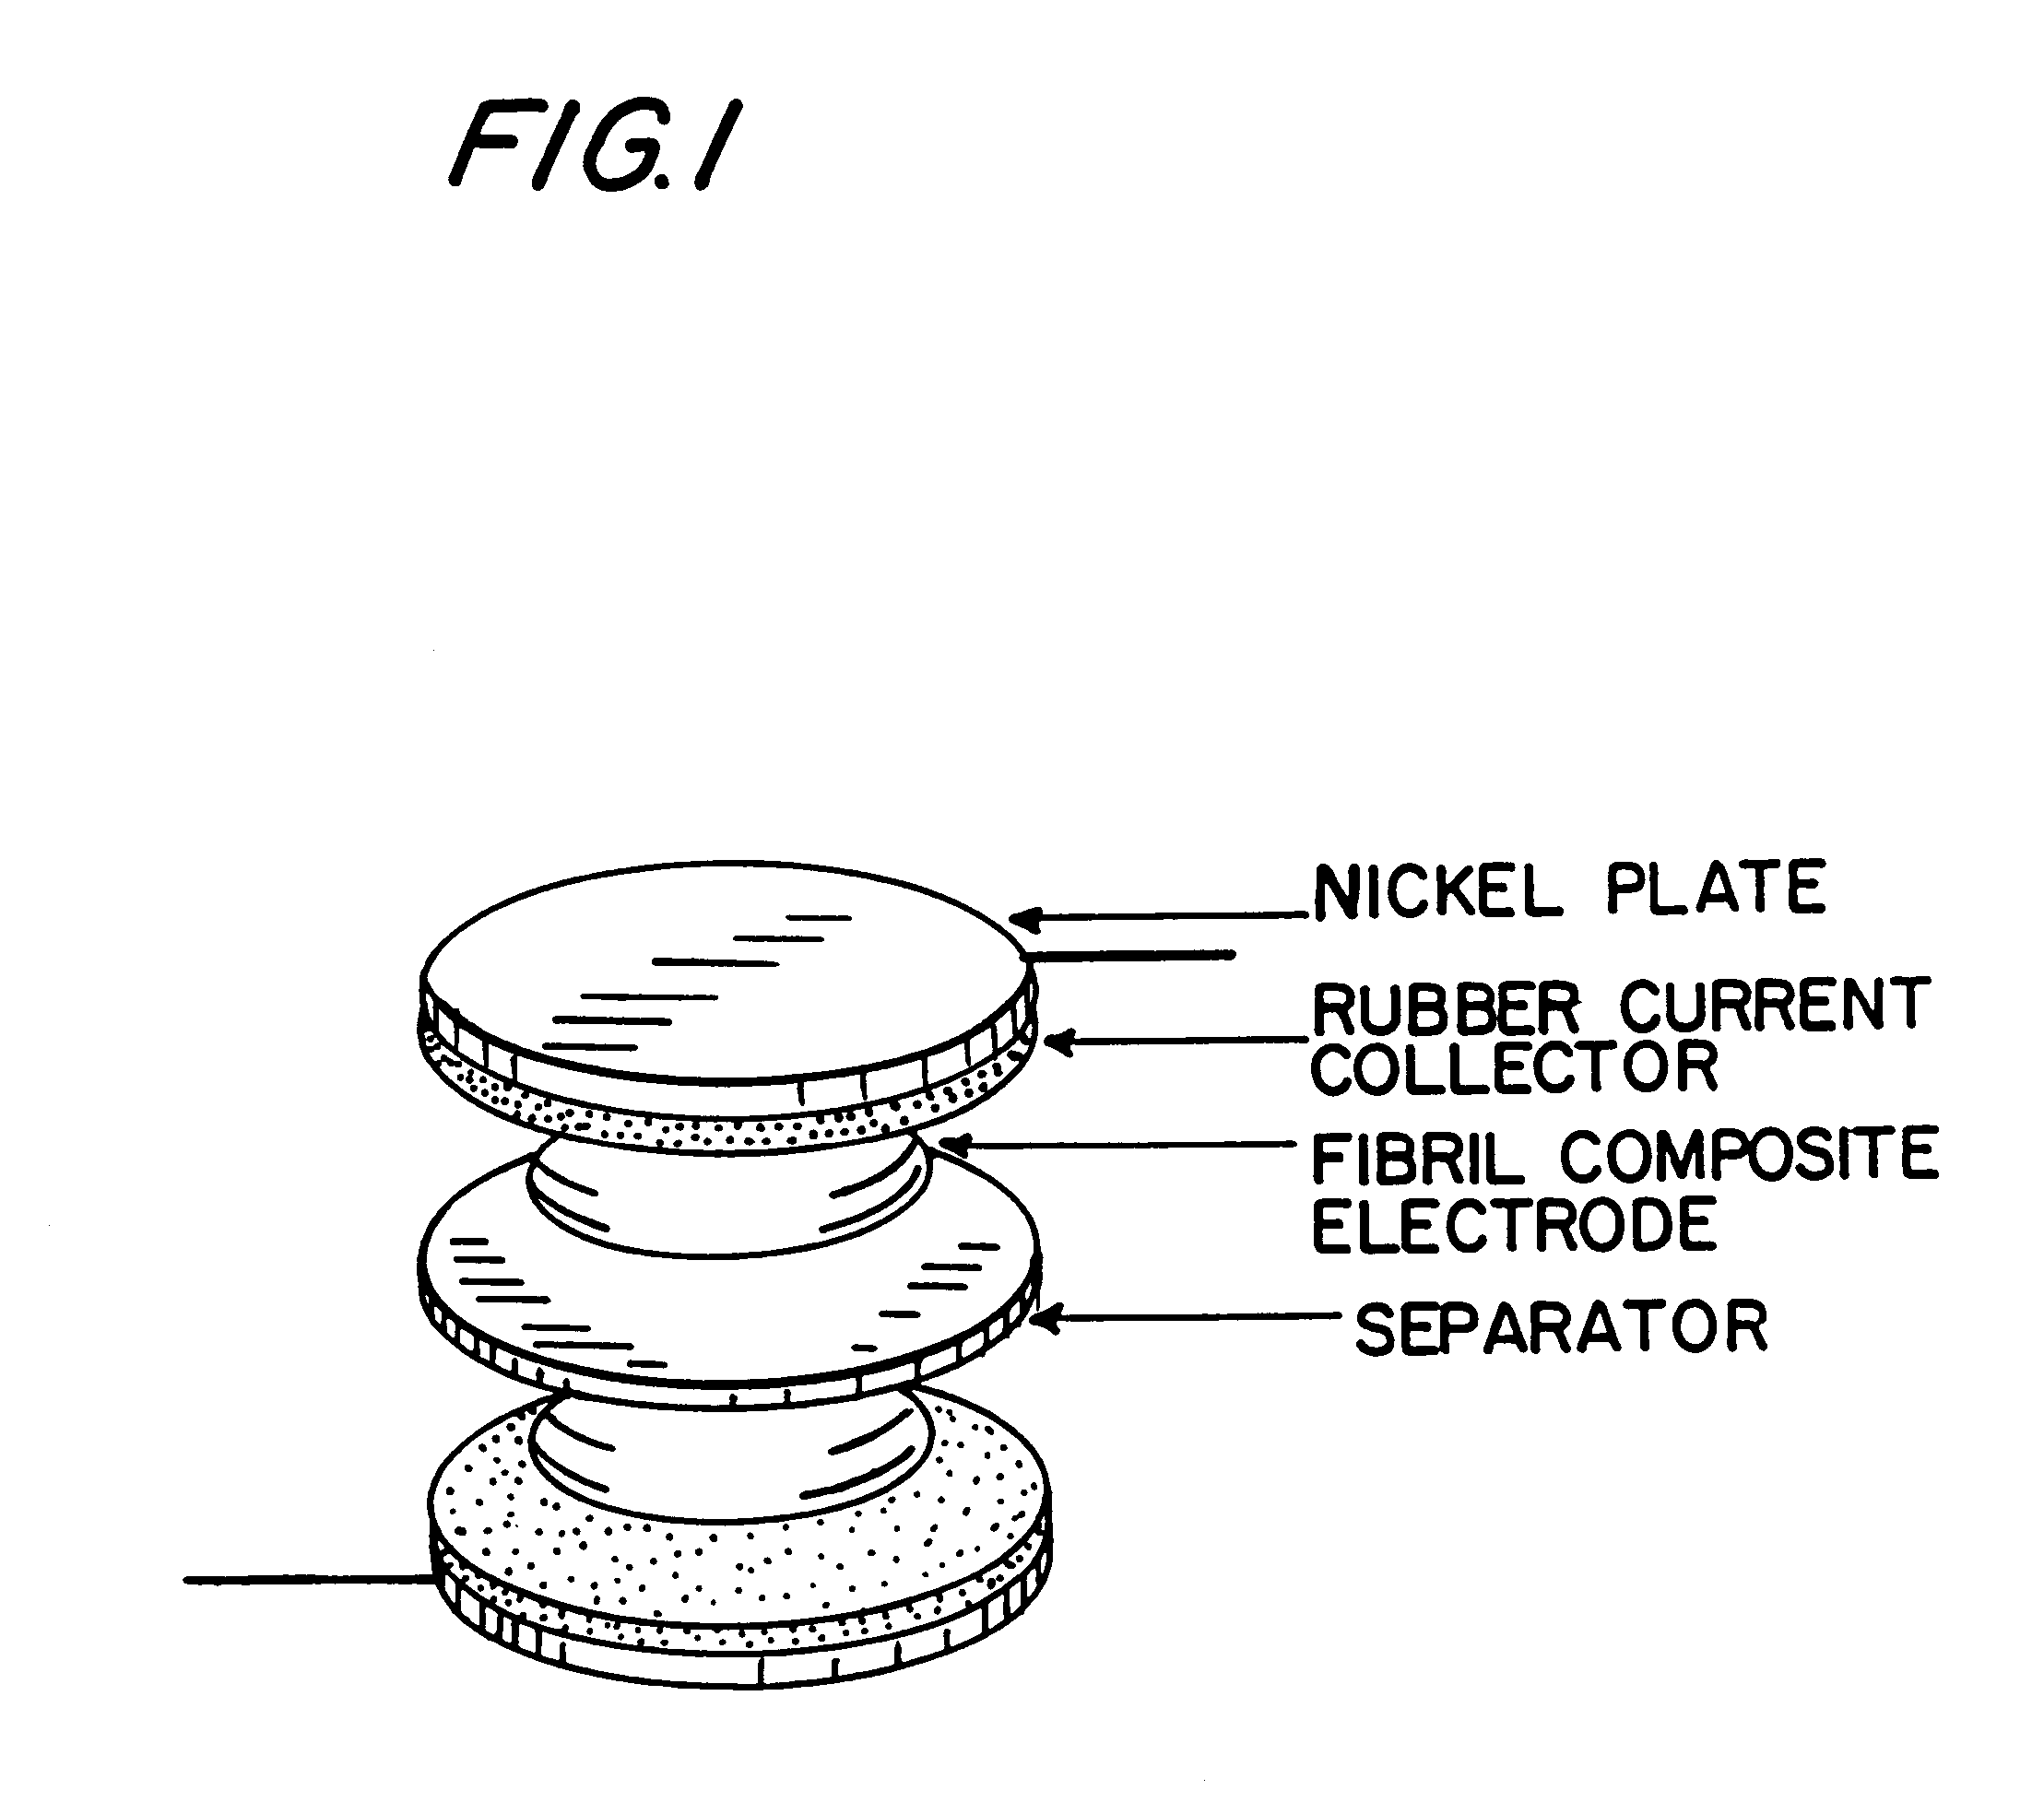 Fibril composite electrode for electrochemical capacitors